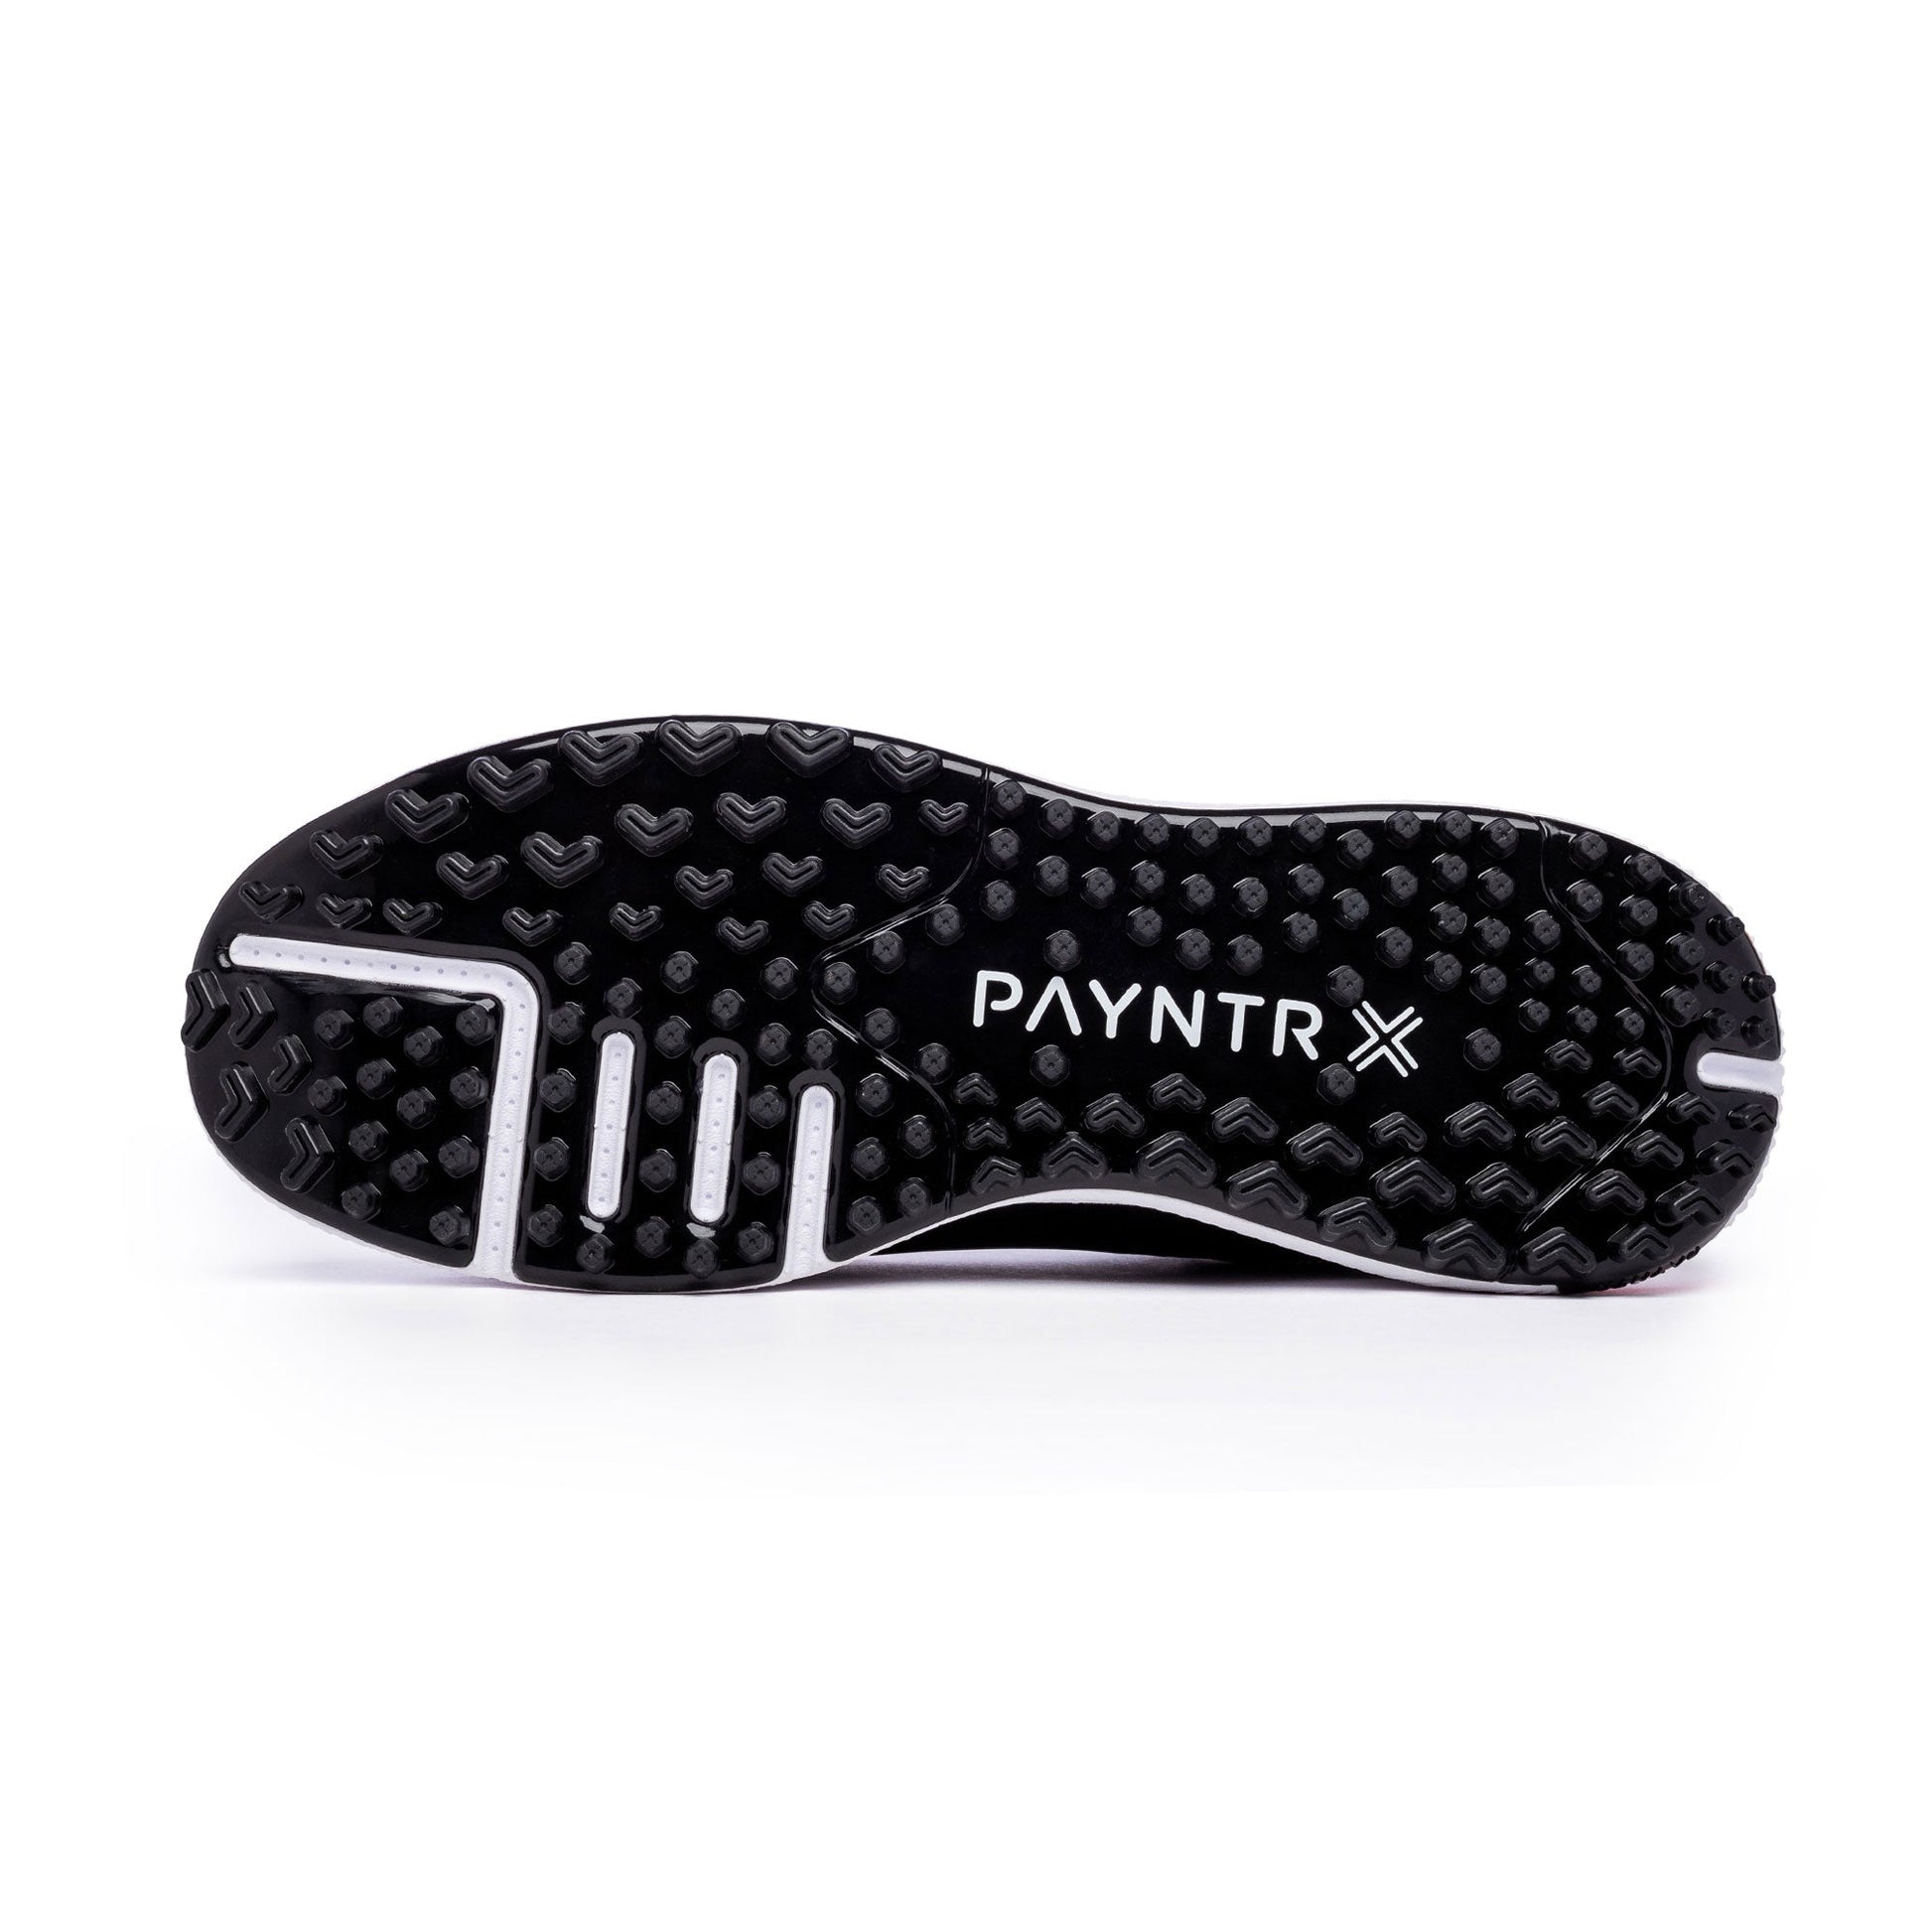 PAYNTR X-003 F Spikeless Golf Shoes (Grey/Black) - Sole